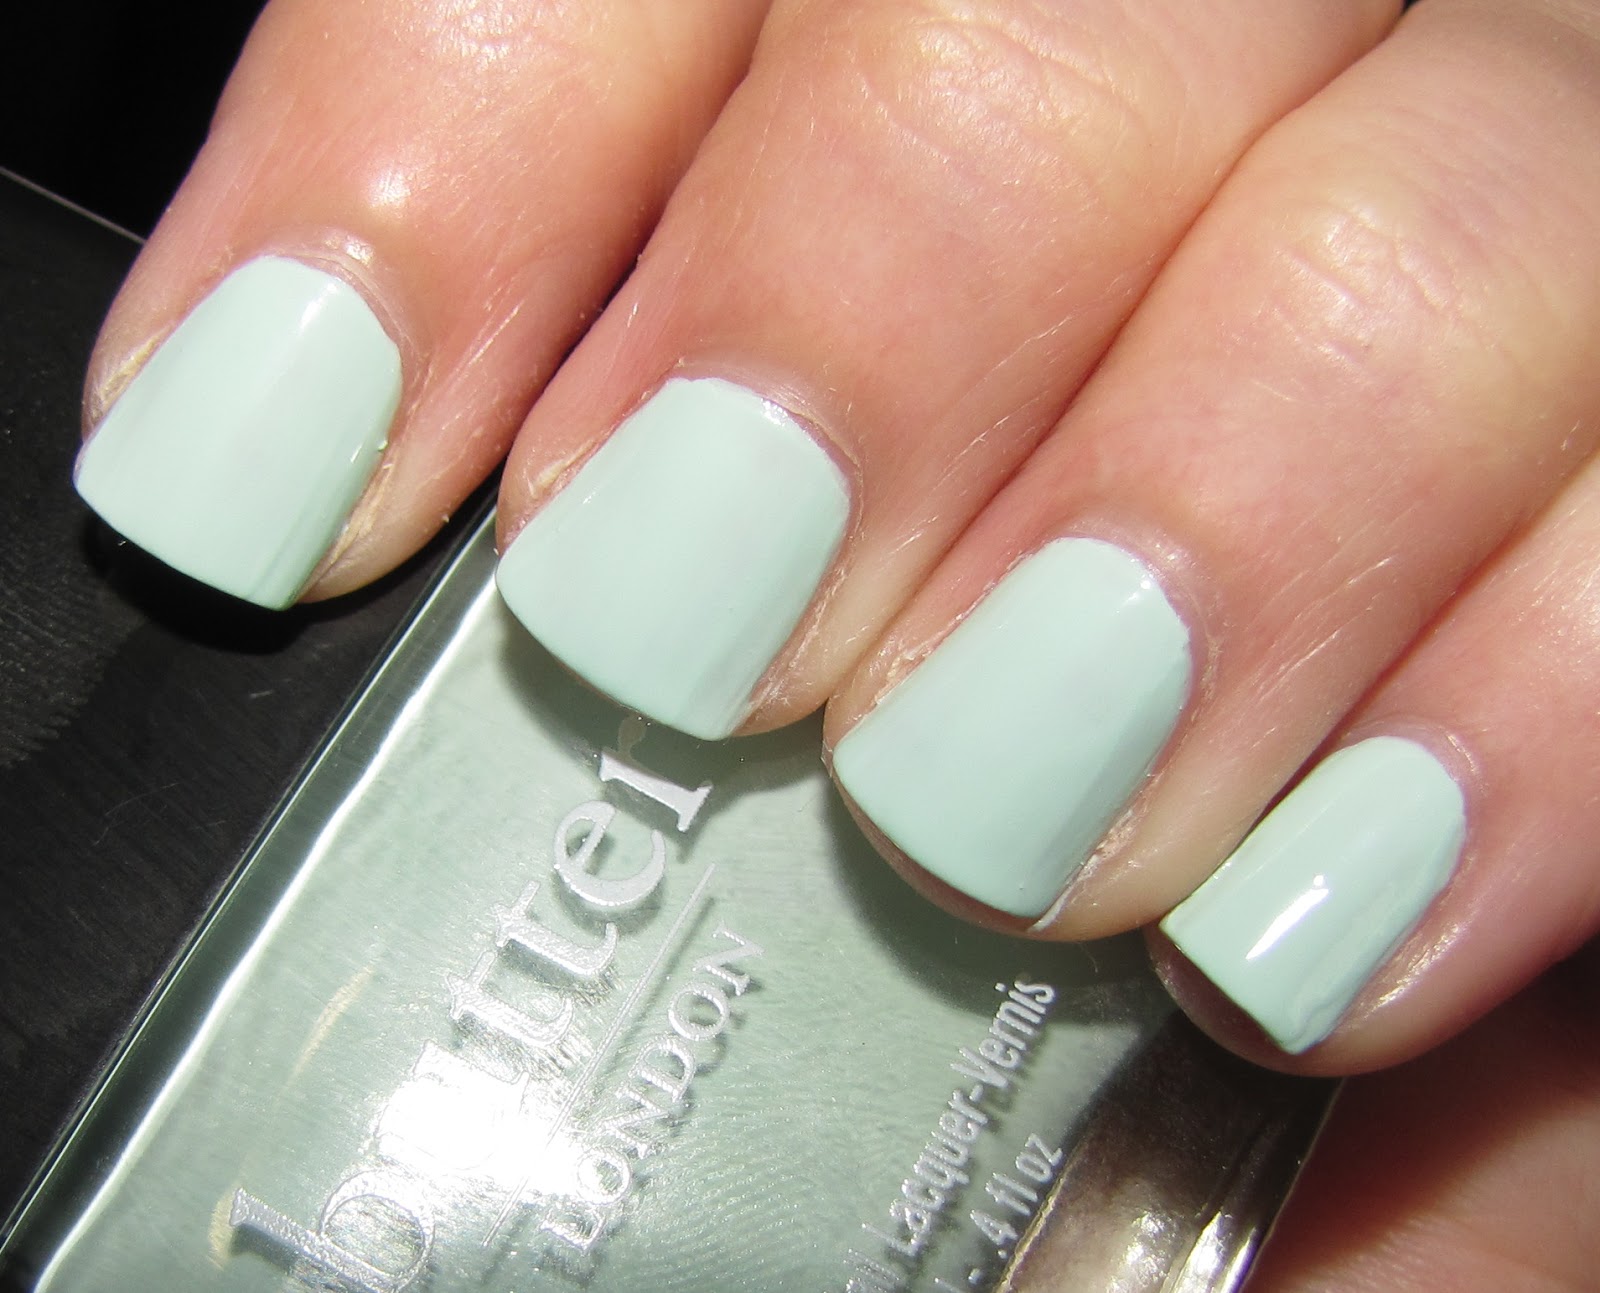 7. Butter London Nail Lacquer in Fiver - wide 8